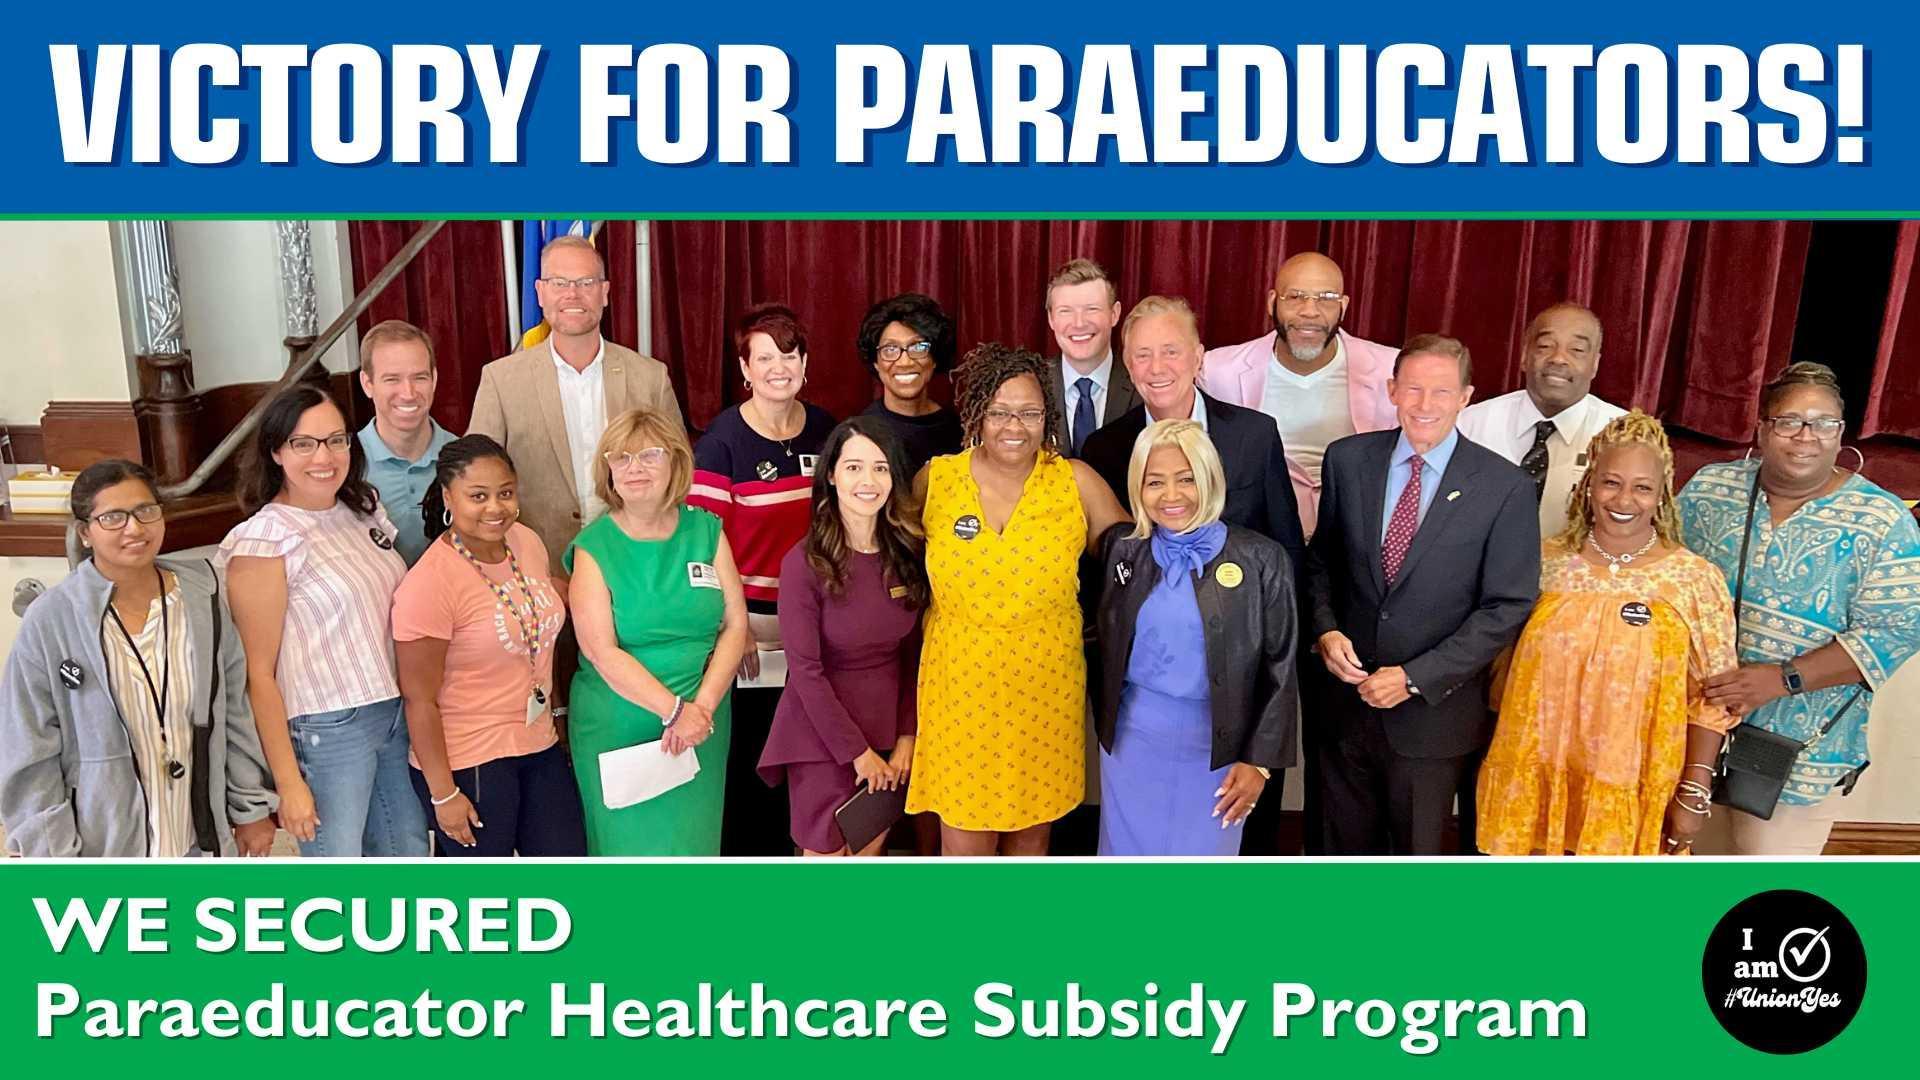 Victory for Paraeducators! Healthcare Subsidy Secured